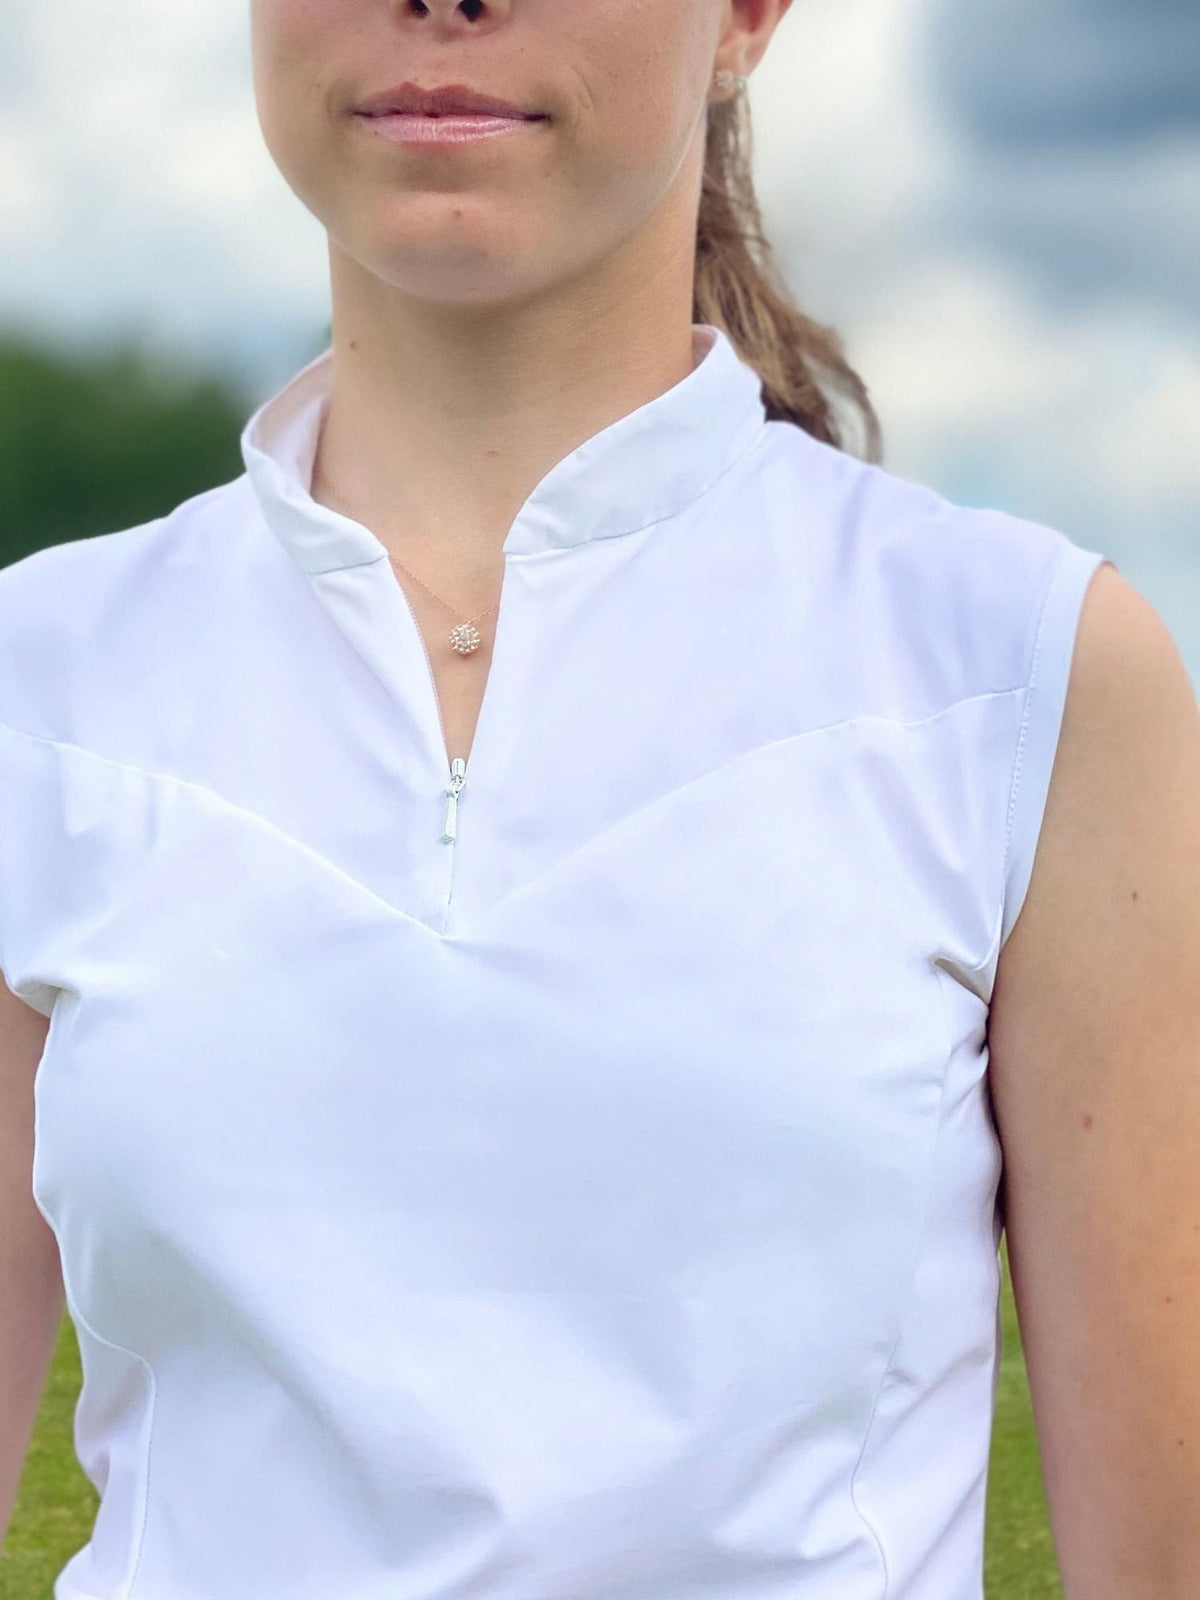 Pebble white golf shirt in luxurious and comfortable material